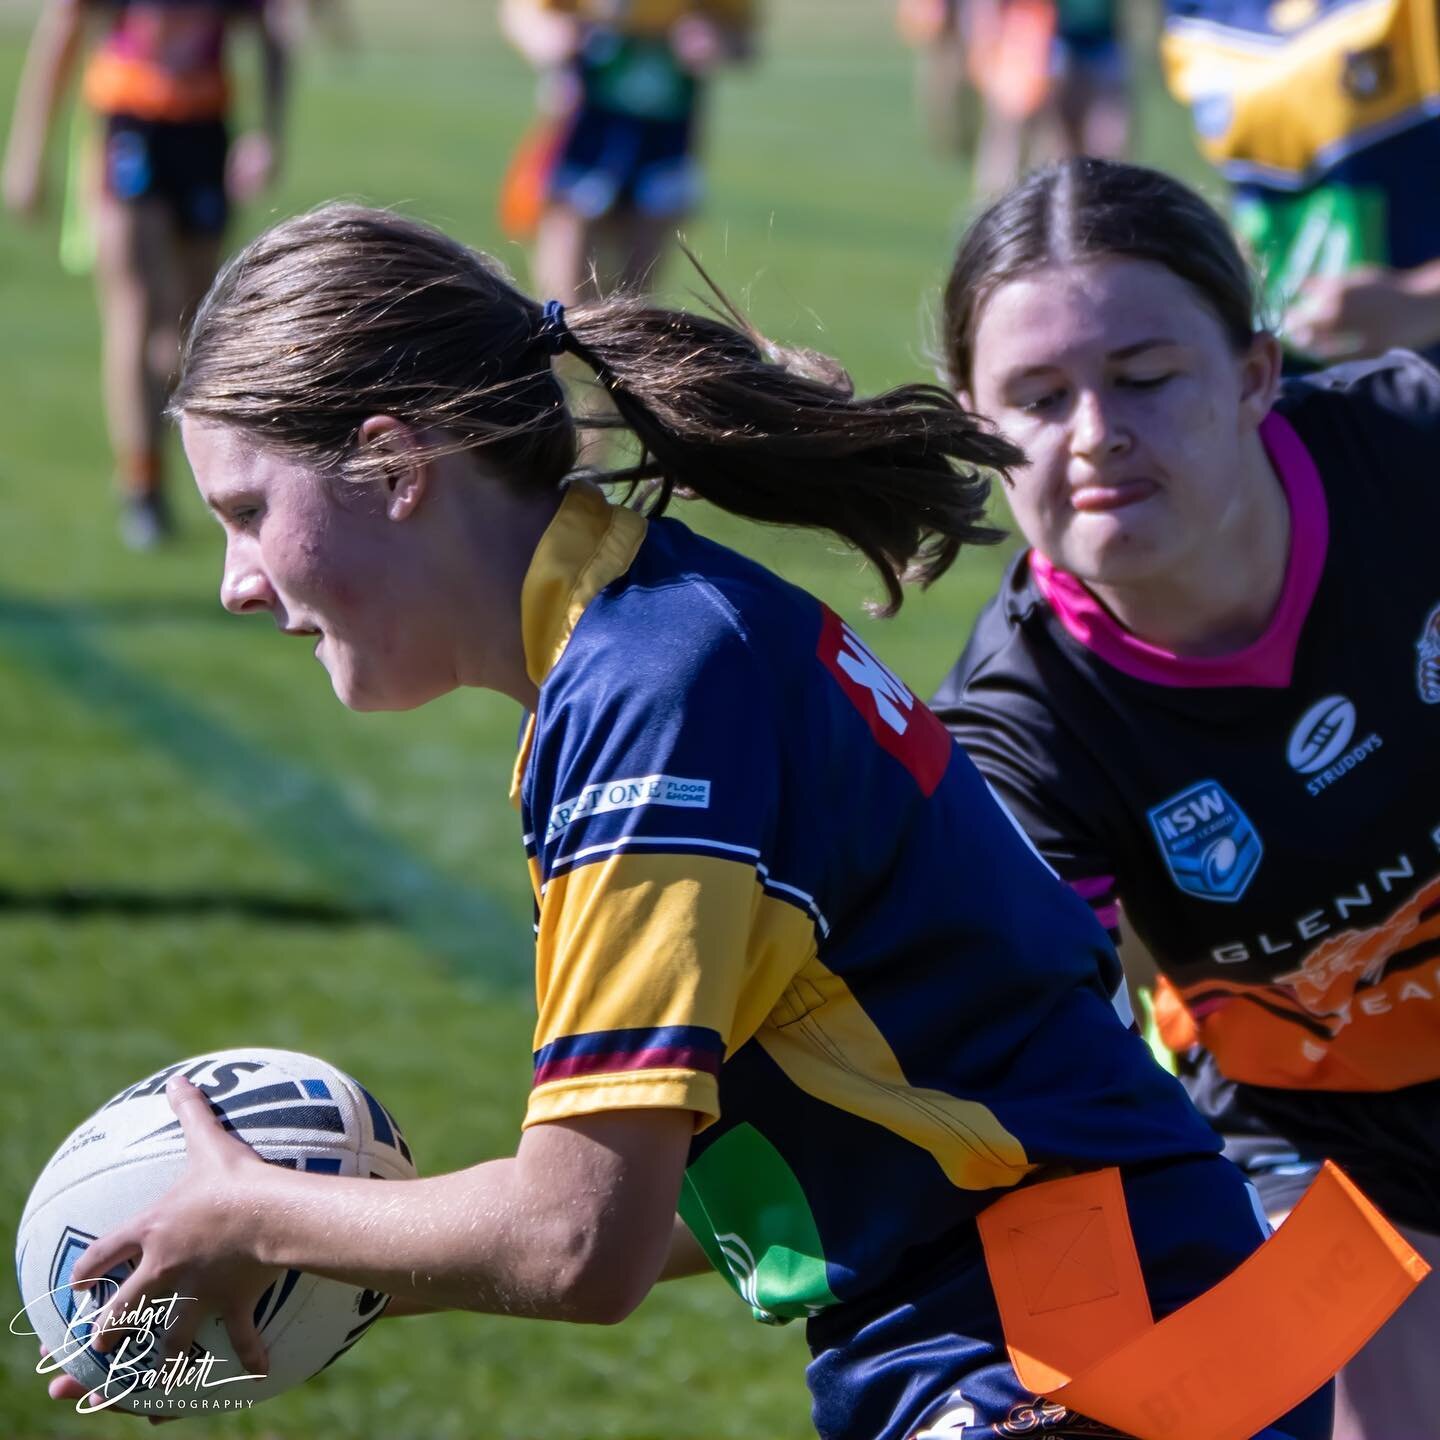 Nothing beats the energy and excitement of a league tag game! 🏉🔥 Check out these shots from the U17s St. Johns JRLFC Blue V Nyngan Tigers match on the weekend. Want to see more? Head over to our Facebook page for the full album! #leagueTag #rugbyle